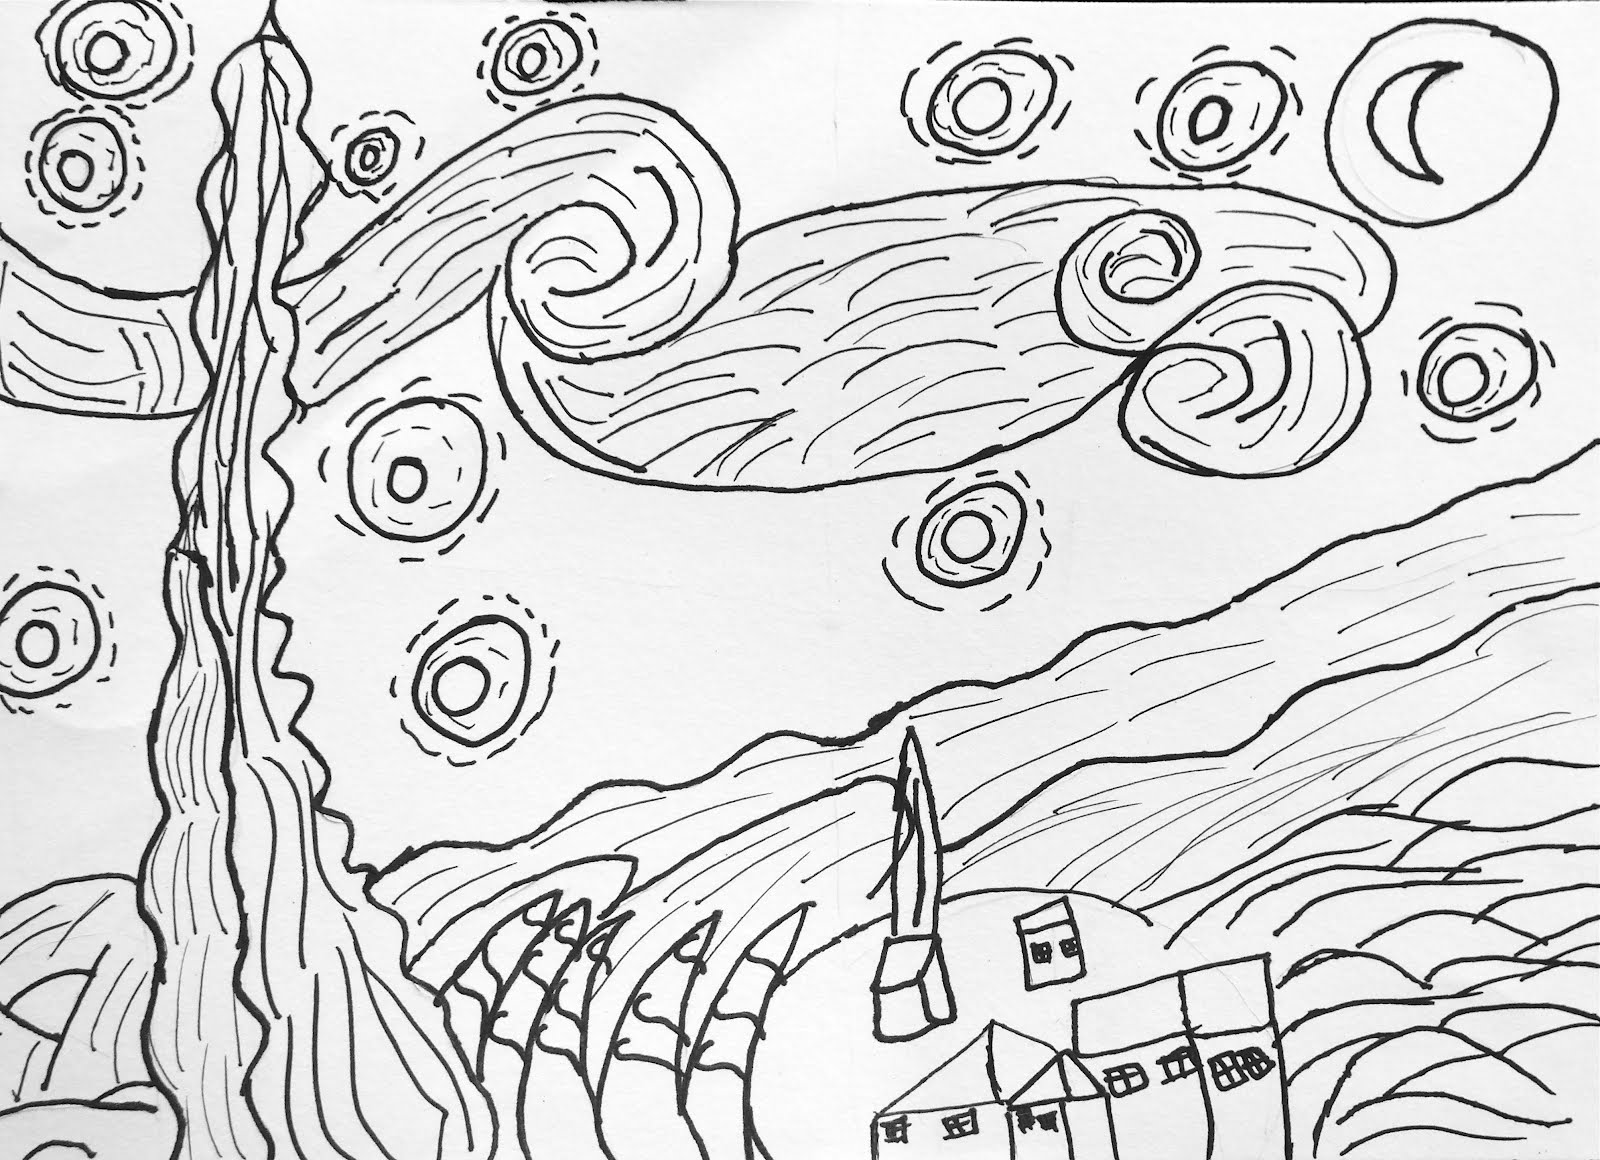 Starry Night Coloring Page Coloring Home